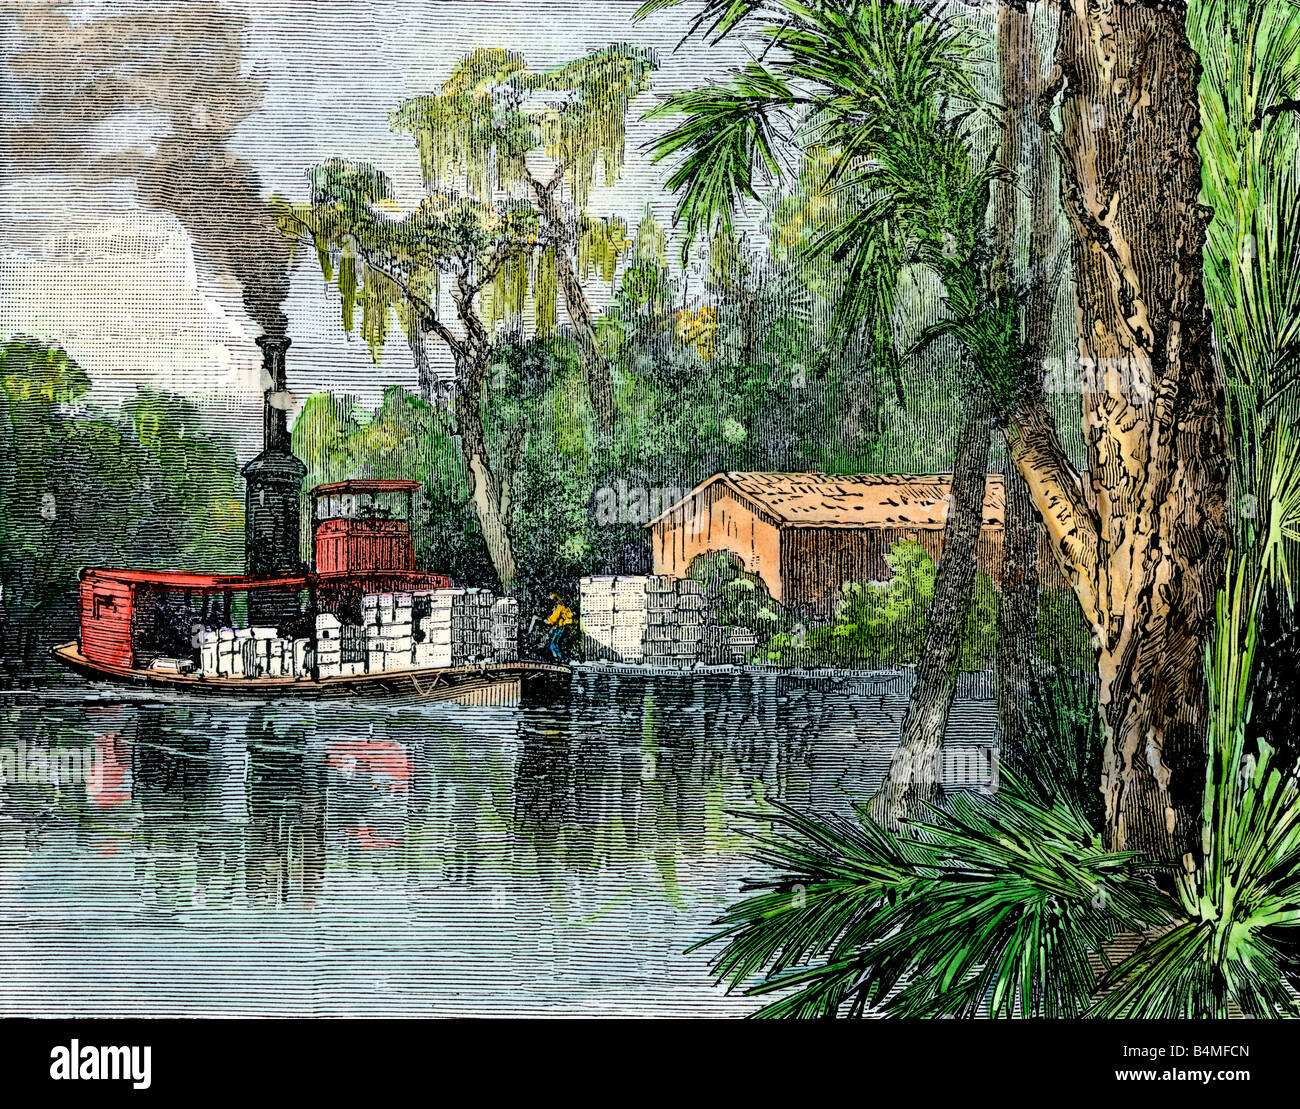 Steamboat loading cotton at a plantation's river wharf in the US South 1800s. Hand-colored woodcut Stock Photo